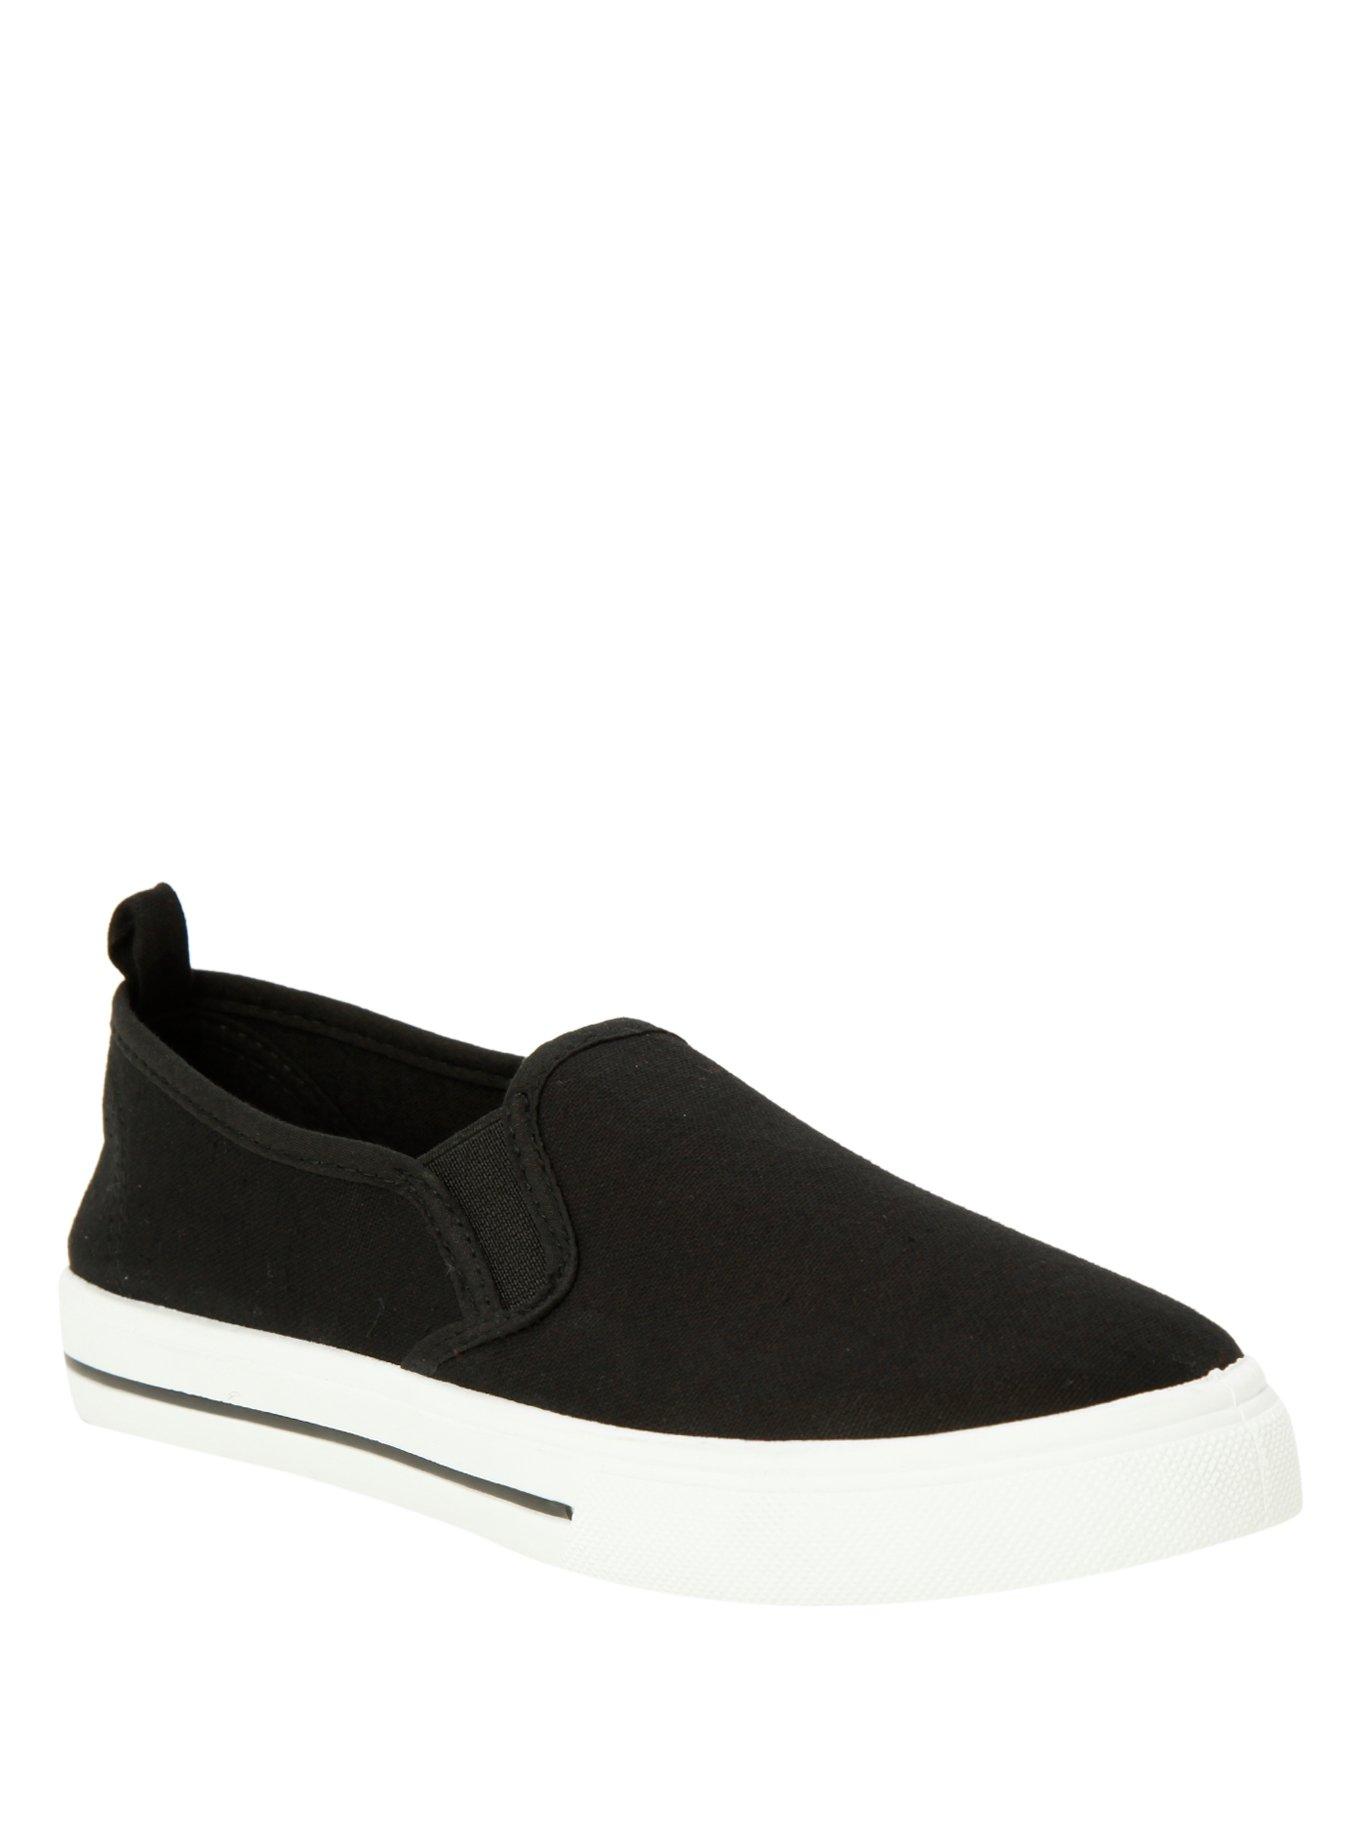 Black Slip-On Shoes | Hot Topic